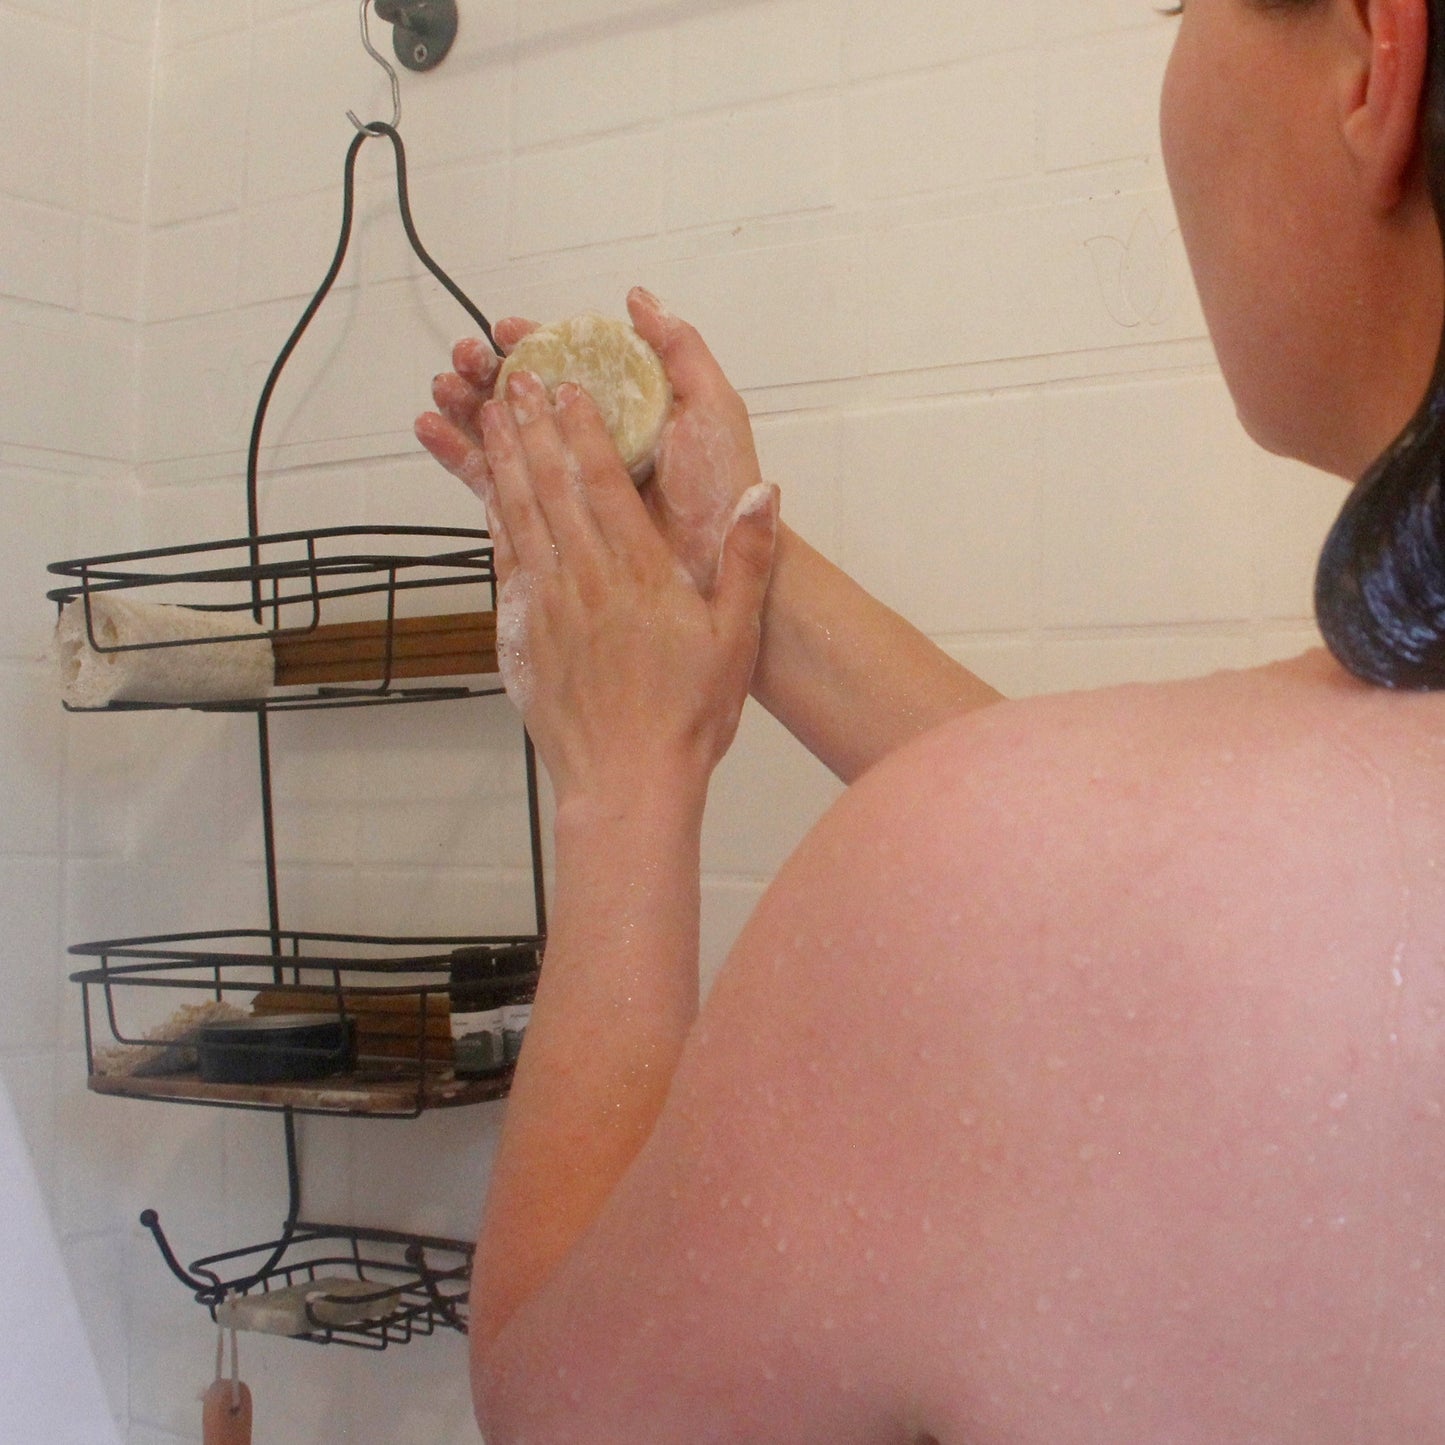 a woman in the shower lathering a solid shampoo bar in her hands